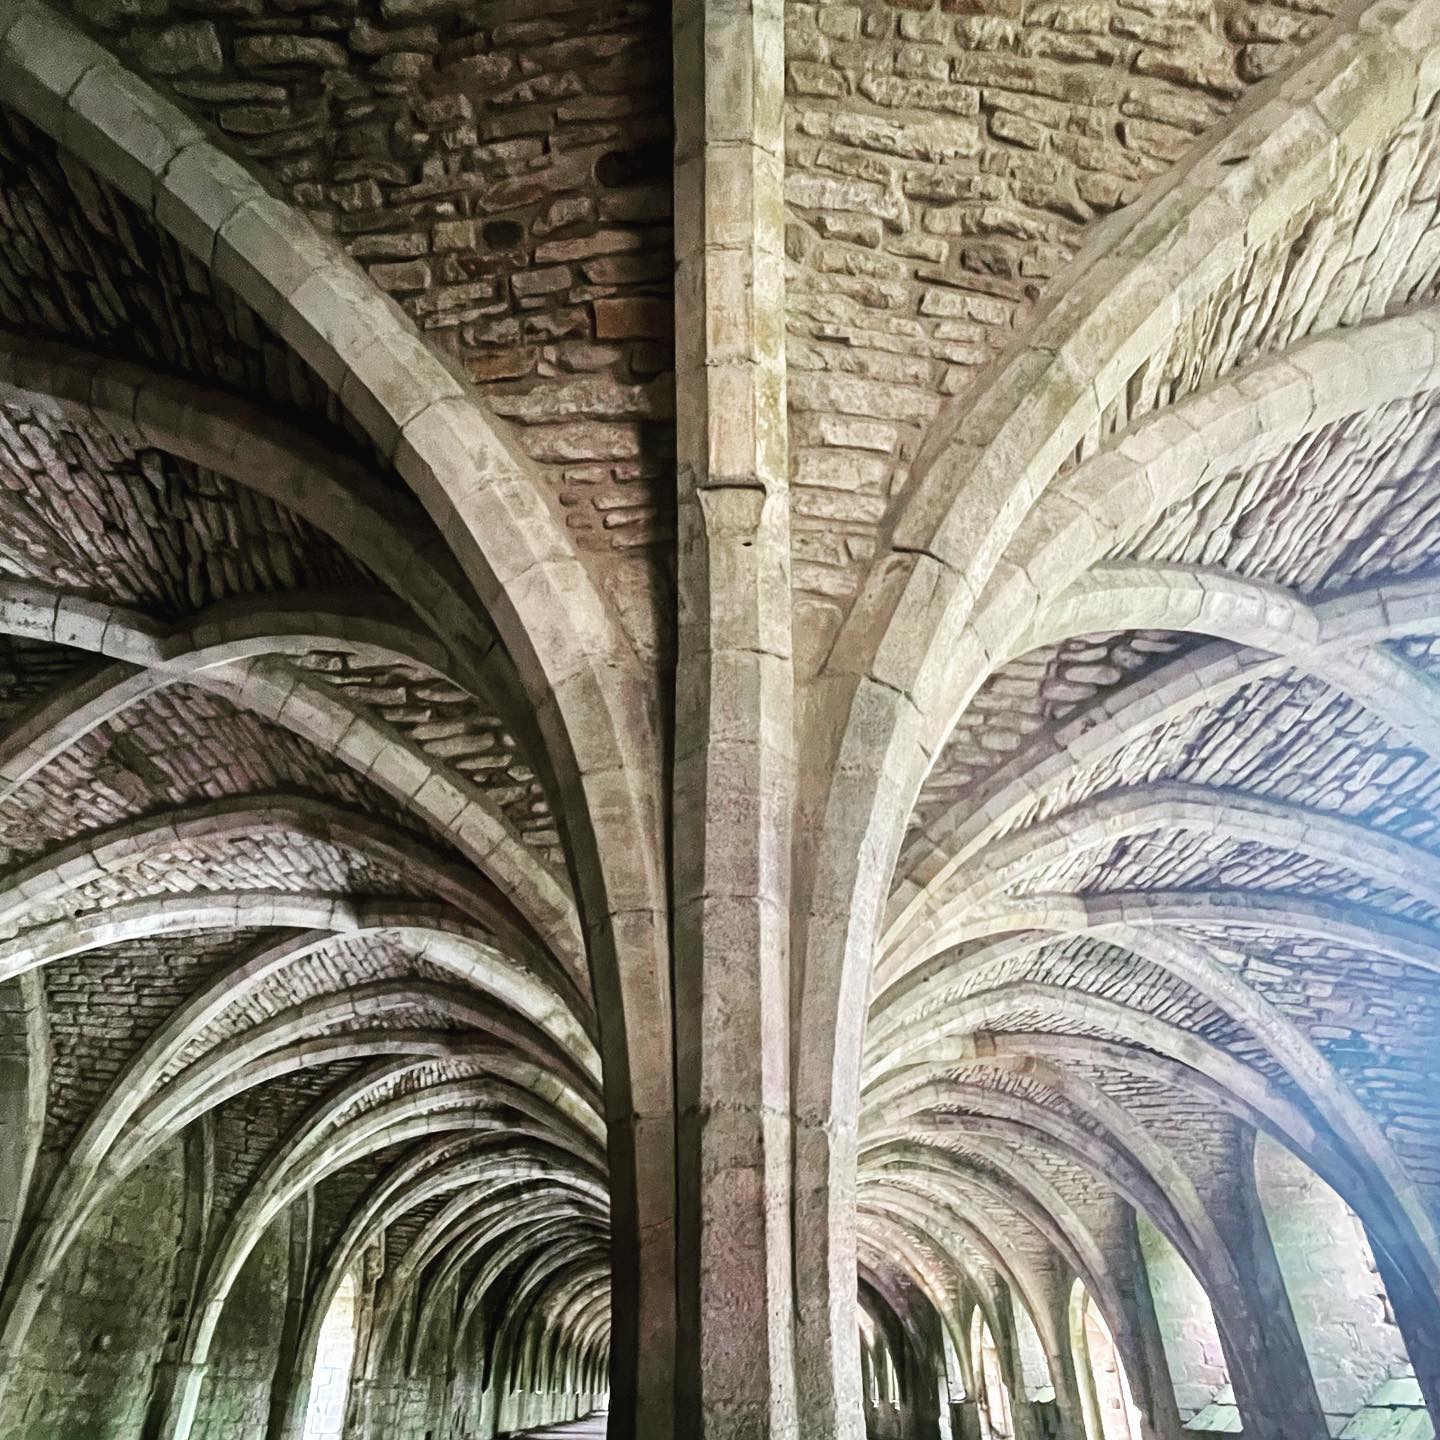 Fountains Abbey

#smlp #nationaltrust #fountainsabbey #iphonography #iphotography #shotoniphone #architecture